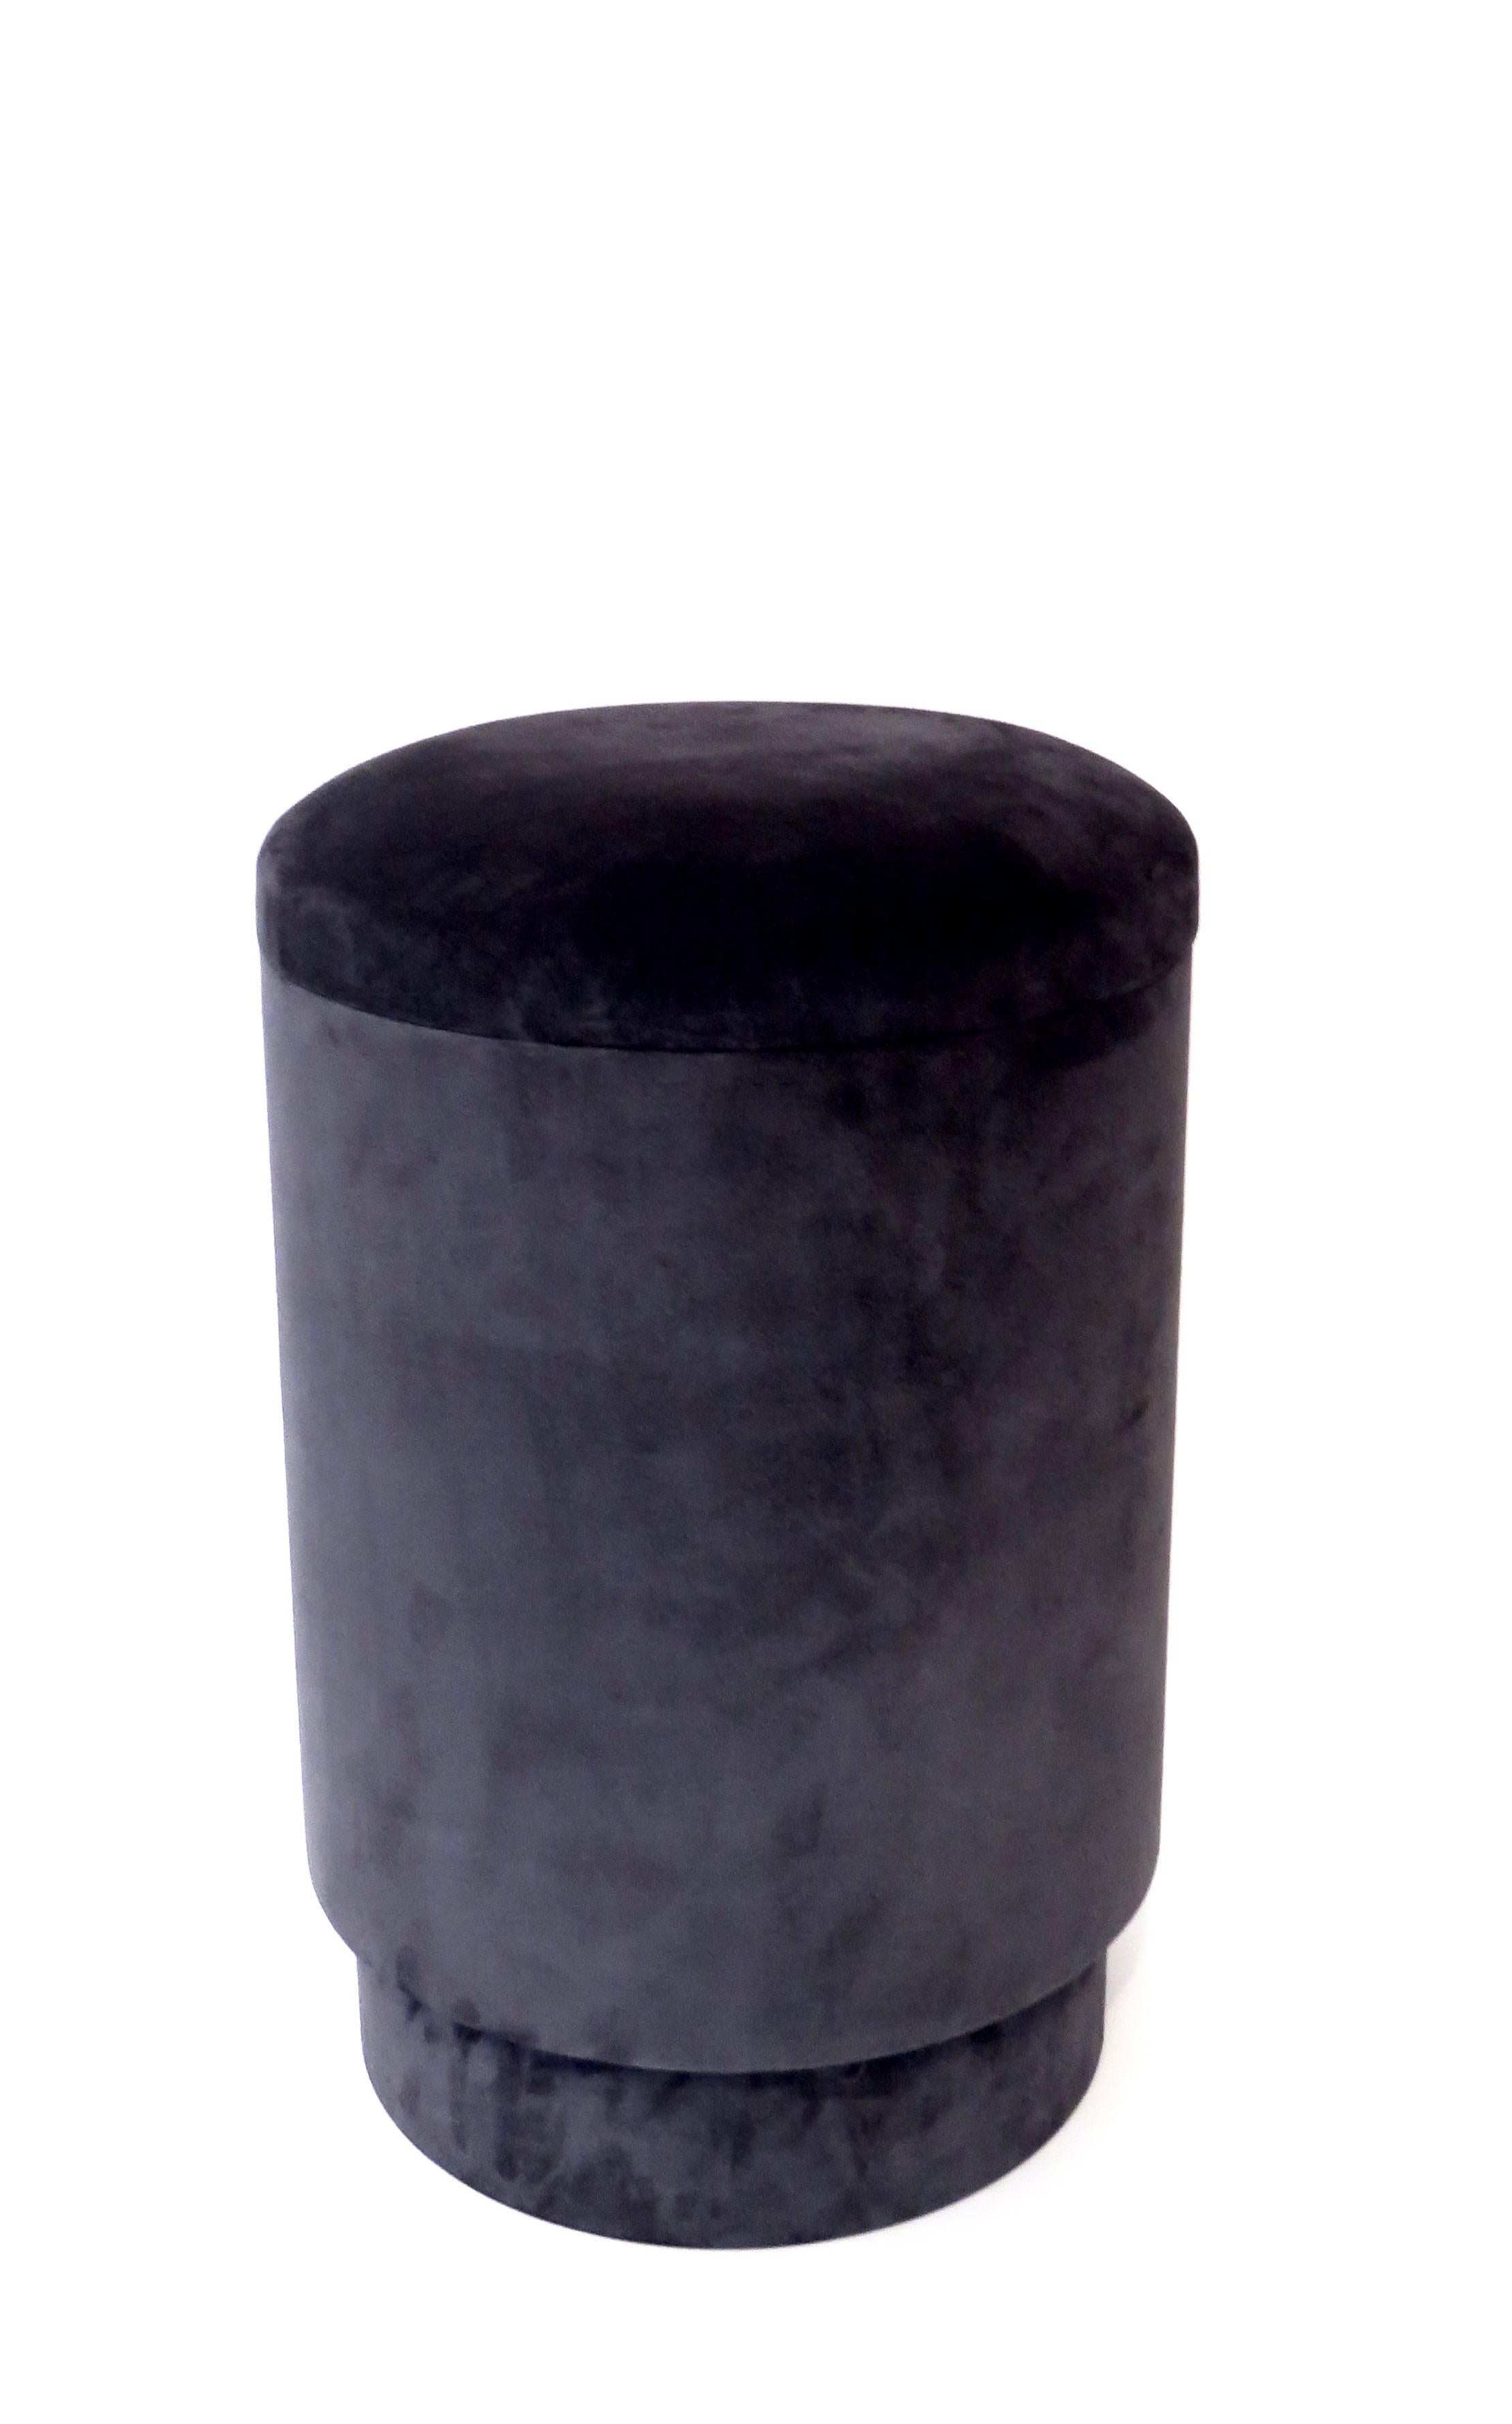 A Michael Verheyden pouf or tabou or stool with storage available in various colors. 
Pouf with storage space is covered in the most beautiful suede. Covered in black suede inside. 
Michael Verheyden is a Belgium based designer creating home